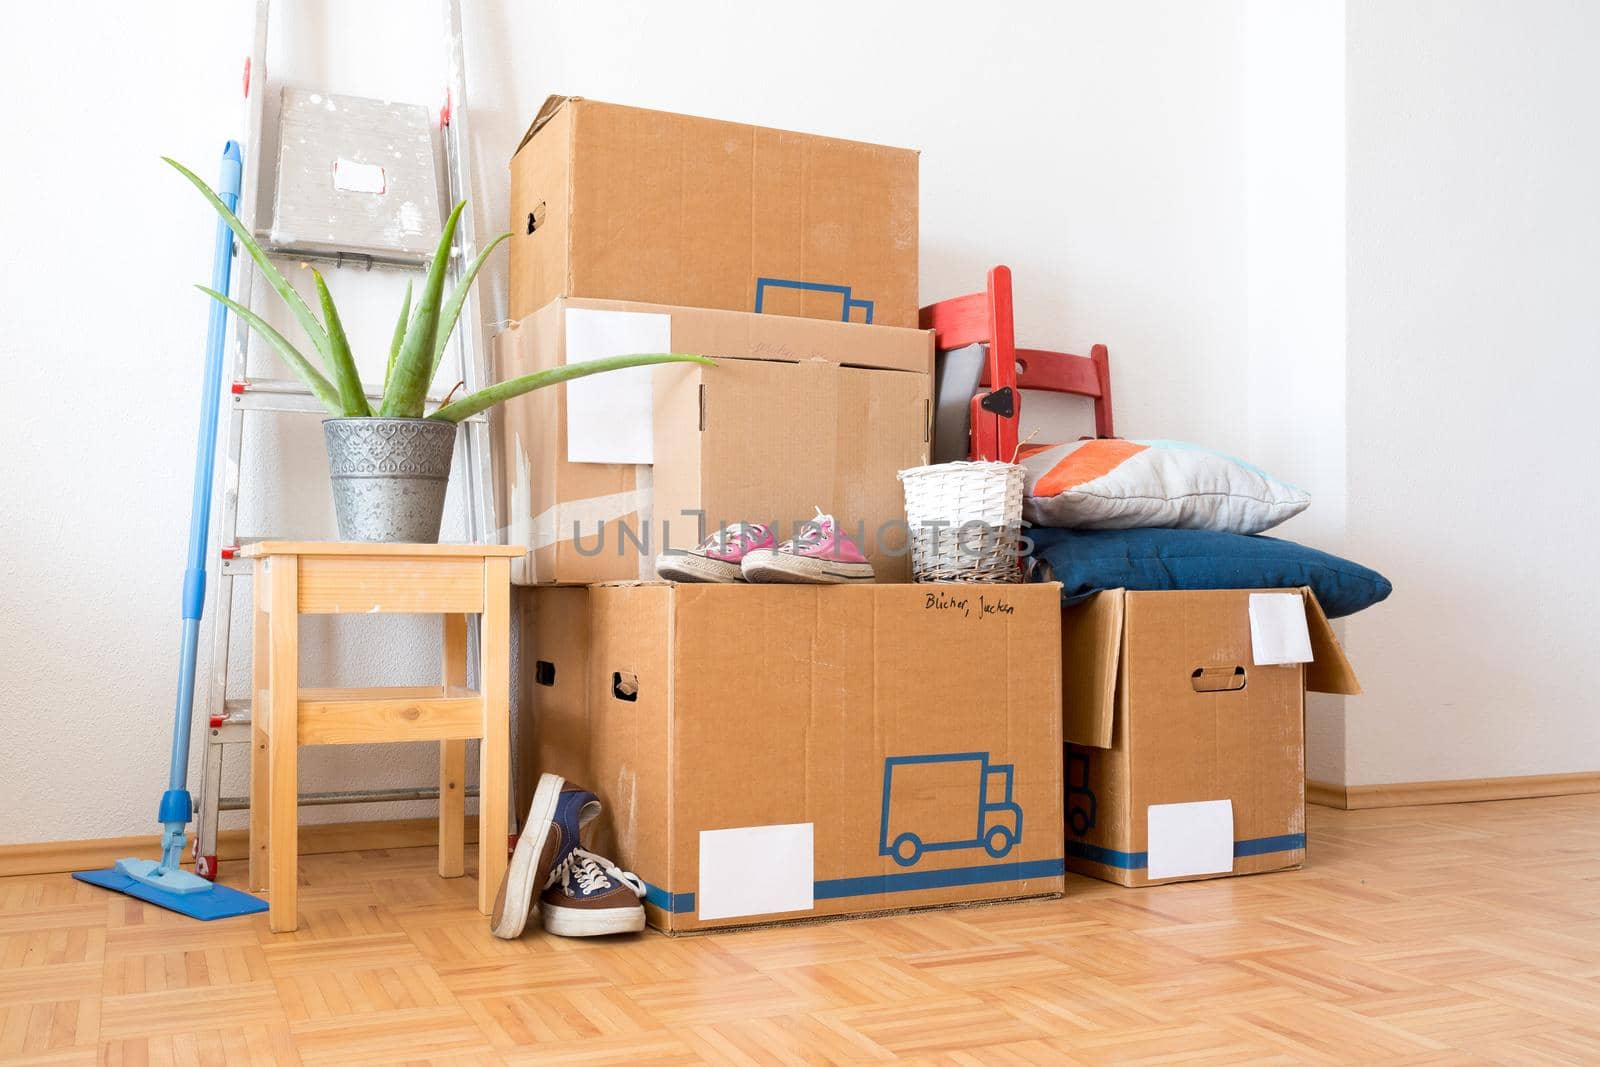 Move. Cardboard boxes, cleaning stuff and things for moving into a new home